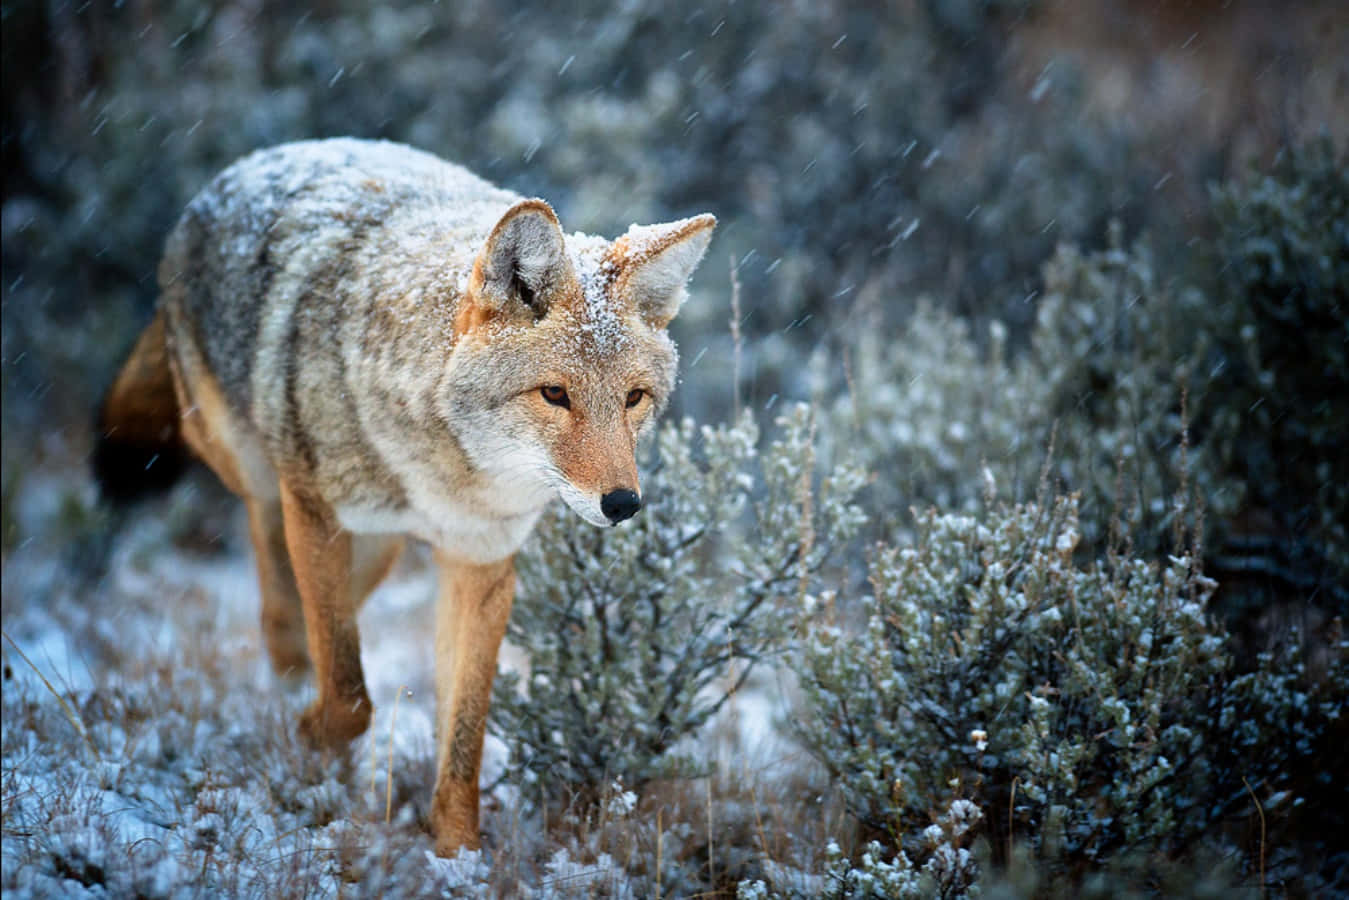 "The Cunning Coyote"